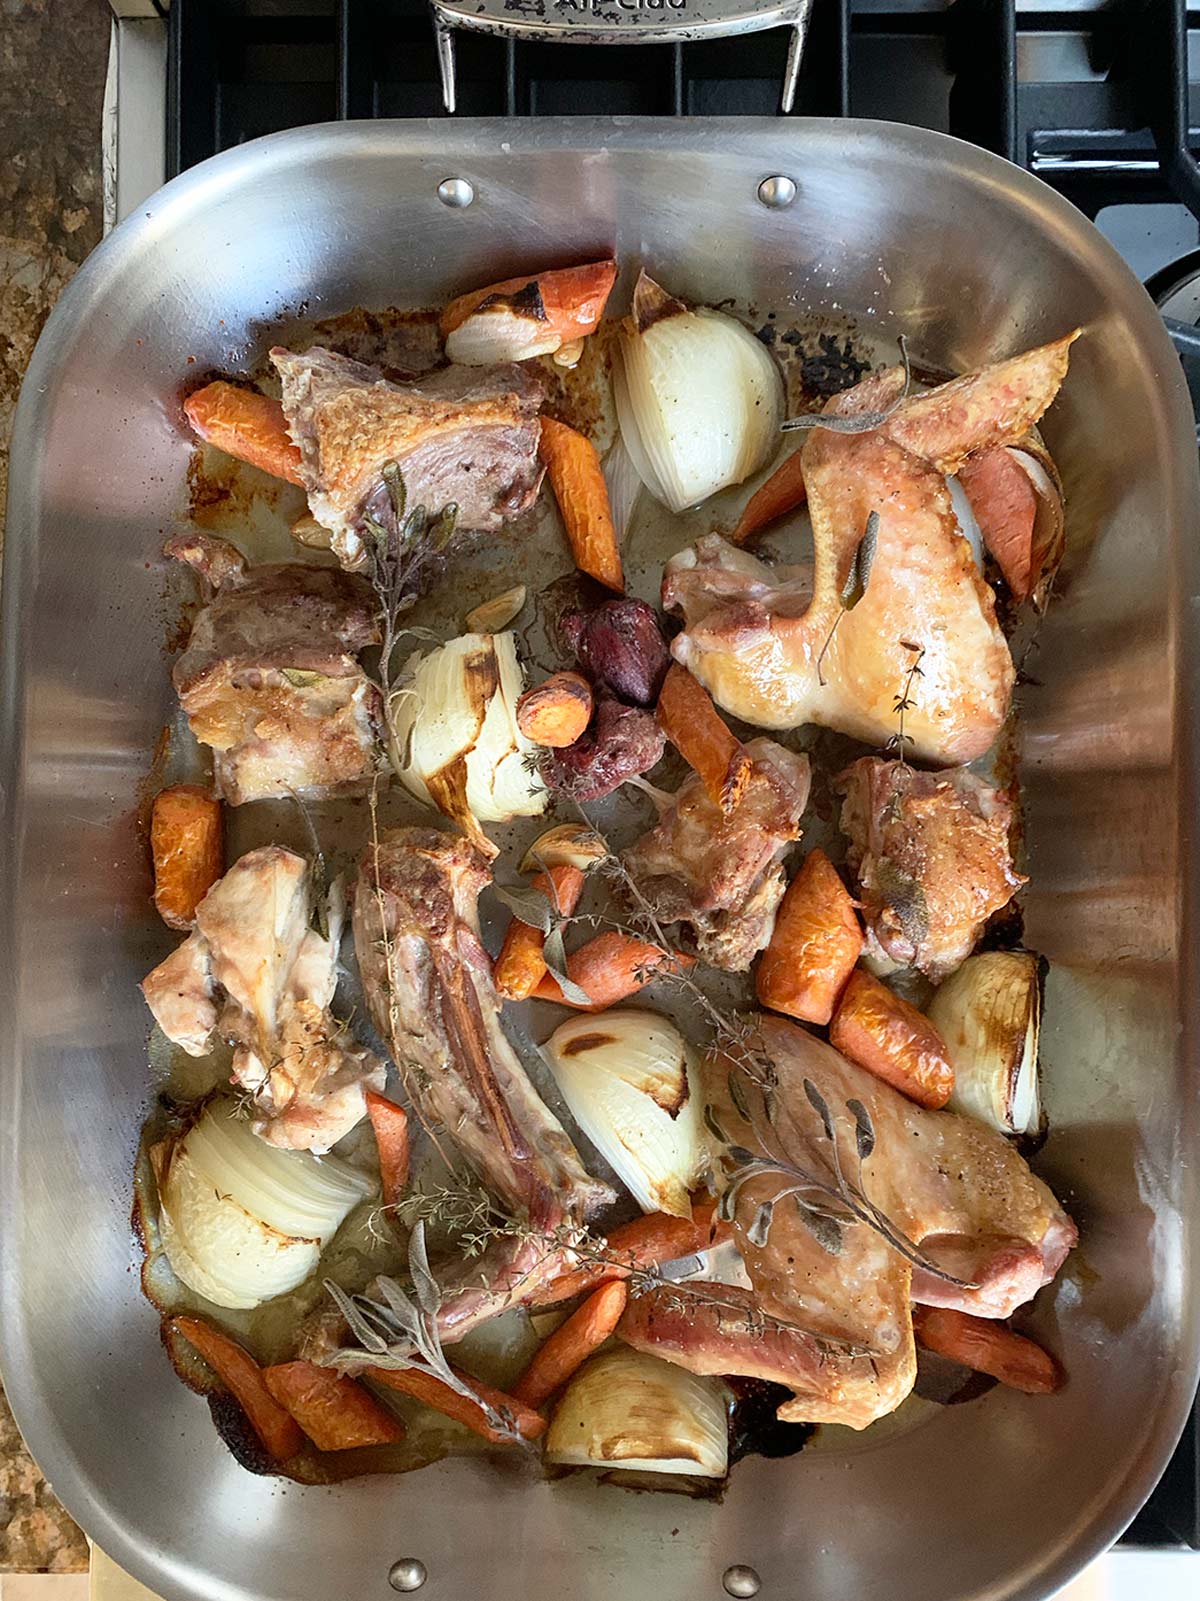 Roasted turkey parts and vegetables in large roasting pan after cooking.